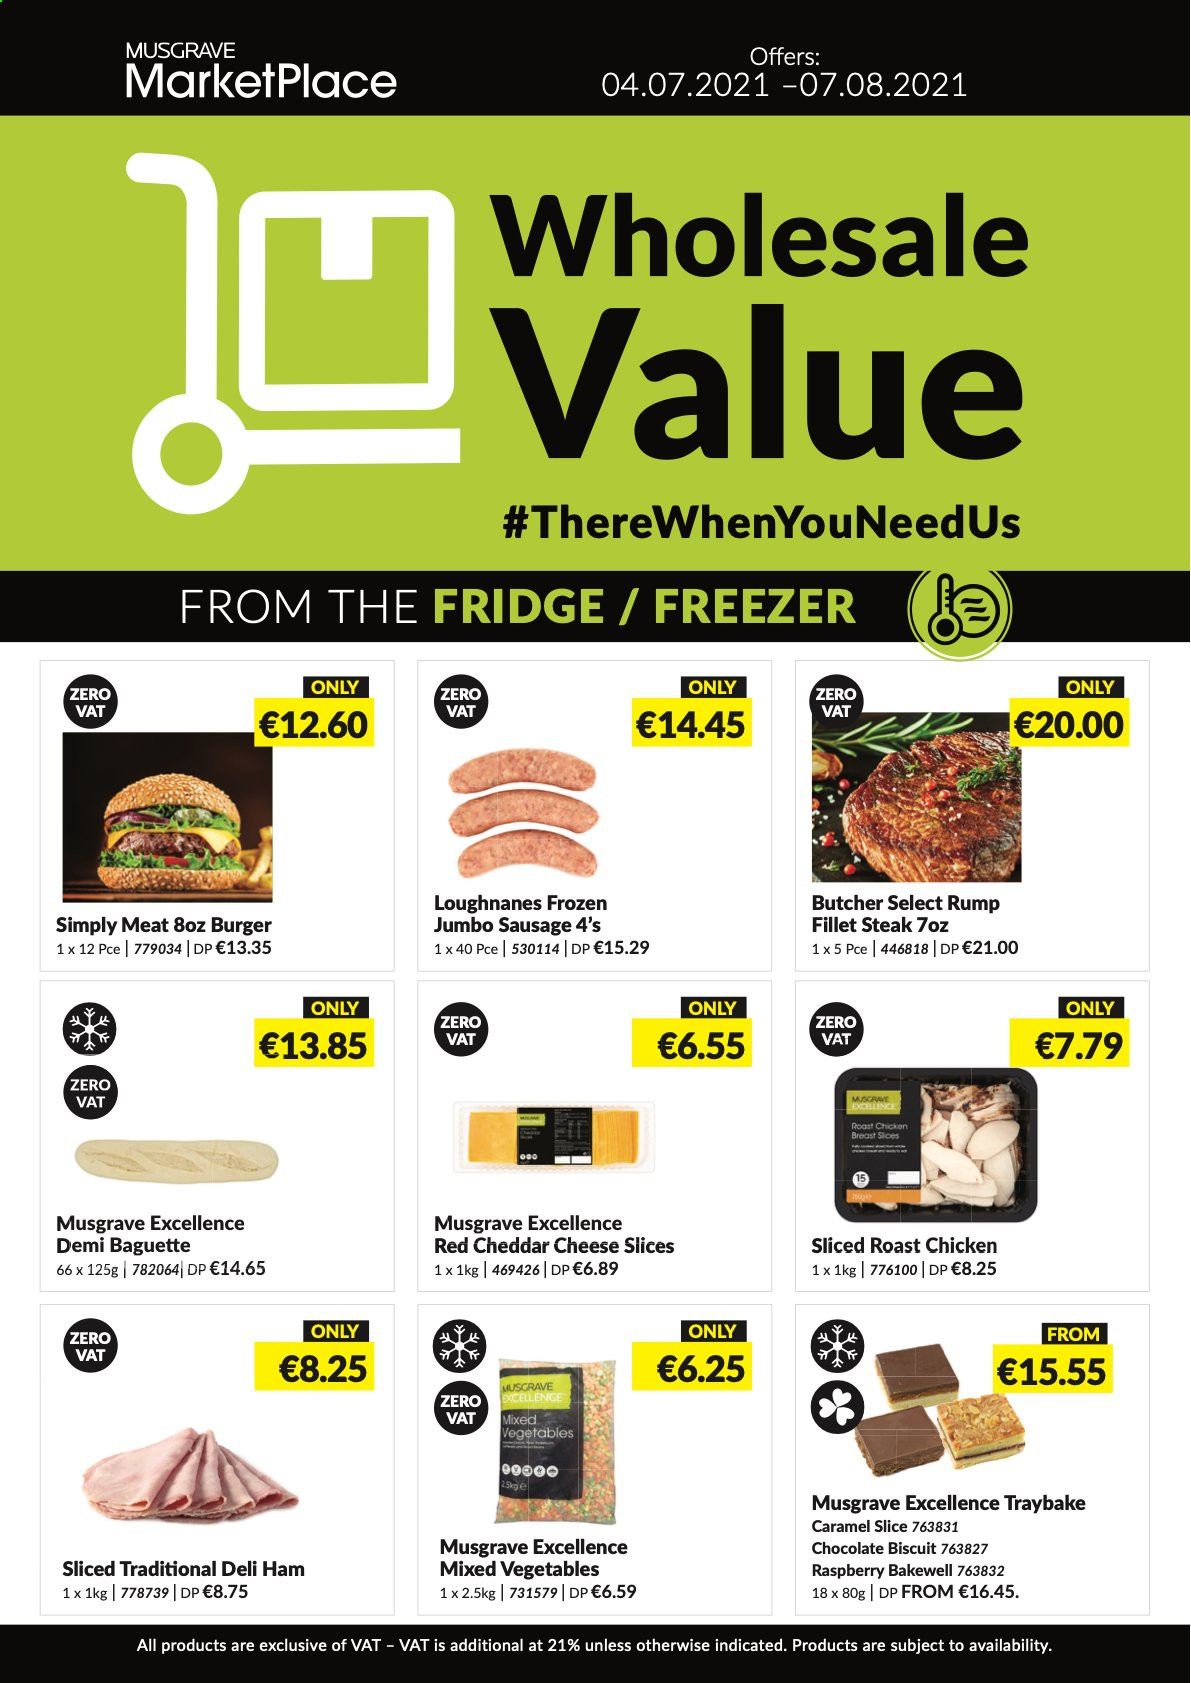 thumbnail - MUSGRAVE Market Place offer  - 04.07.2021 - 07.08.2021 - Sales products - baguette, chicken roast, hamburger, ham, sausage, sliced cheese, cheddar, cheese, mixed vegetables, chocolate, biscuit, caramel, chicken breasts, steak. Page 1.